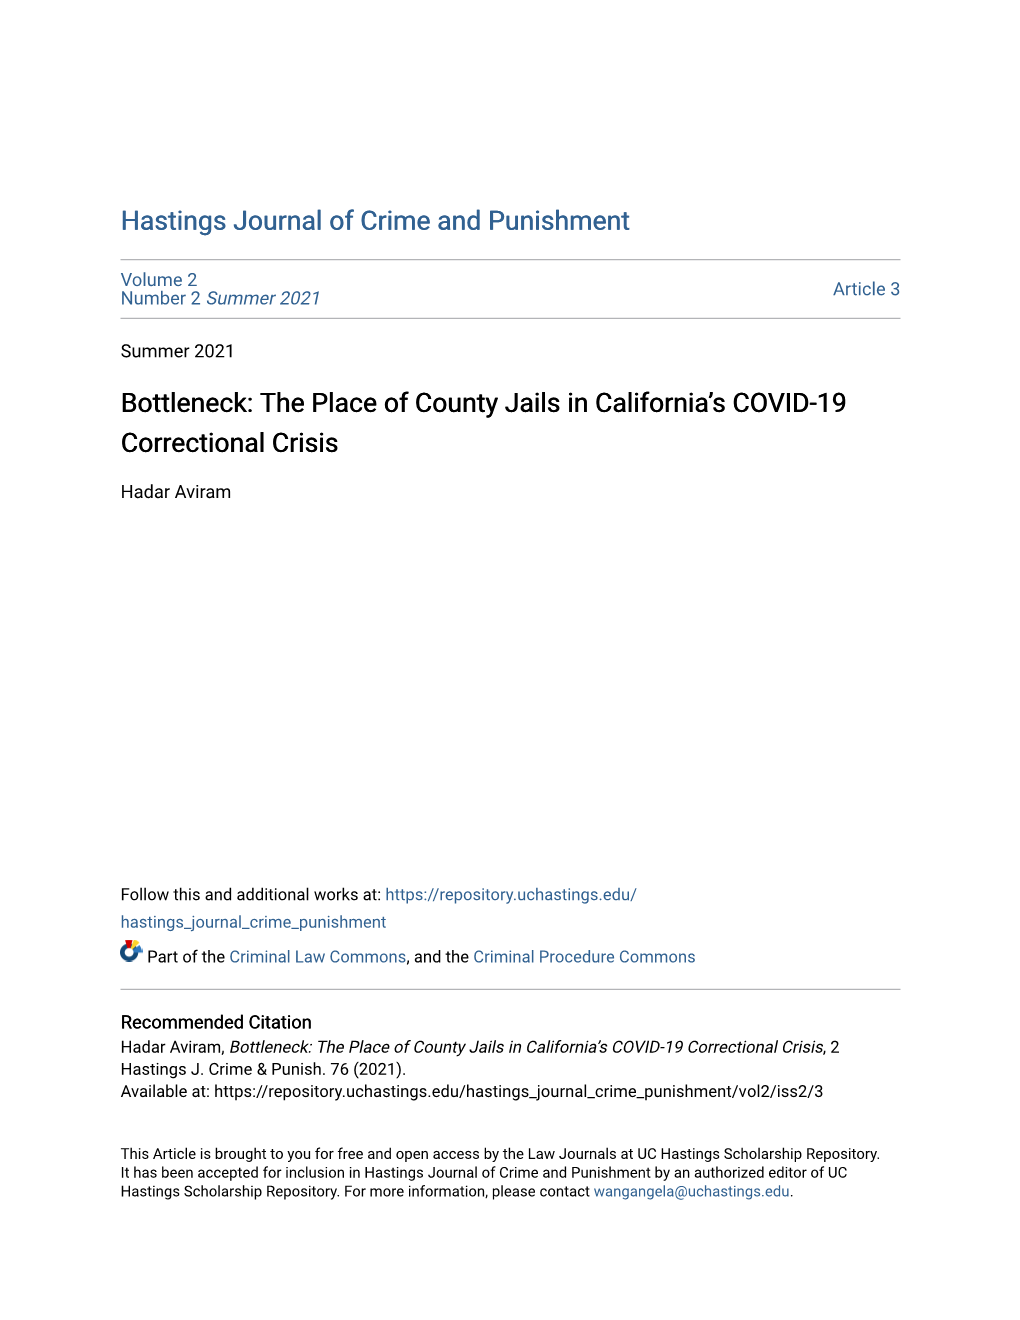 The Place of County Jails in California's COVID-19 Correctional